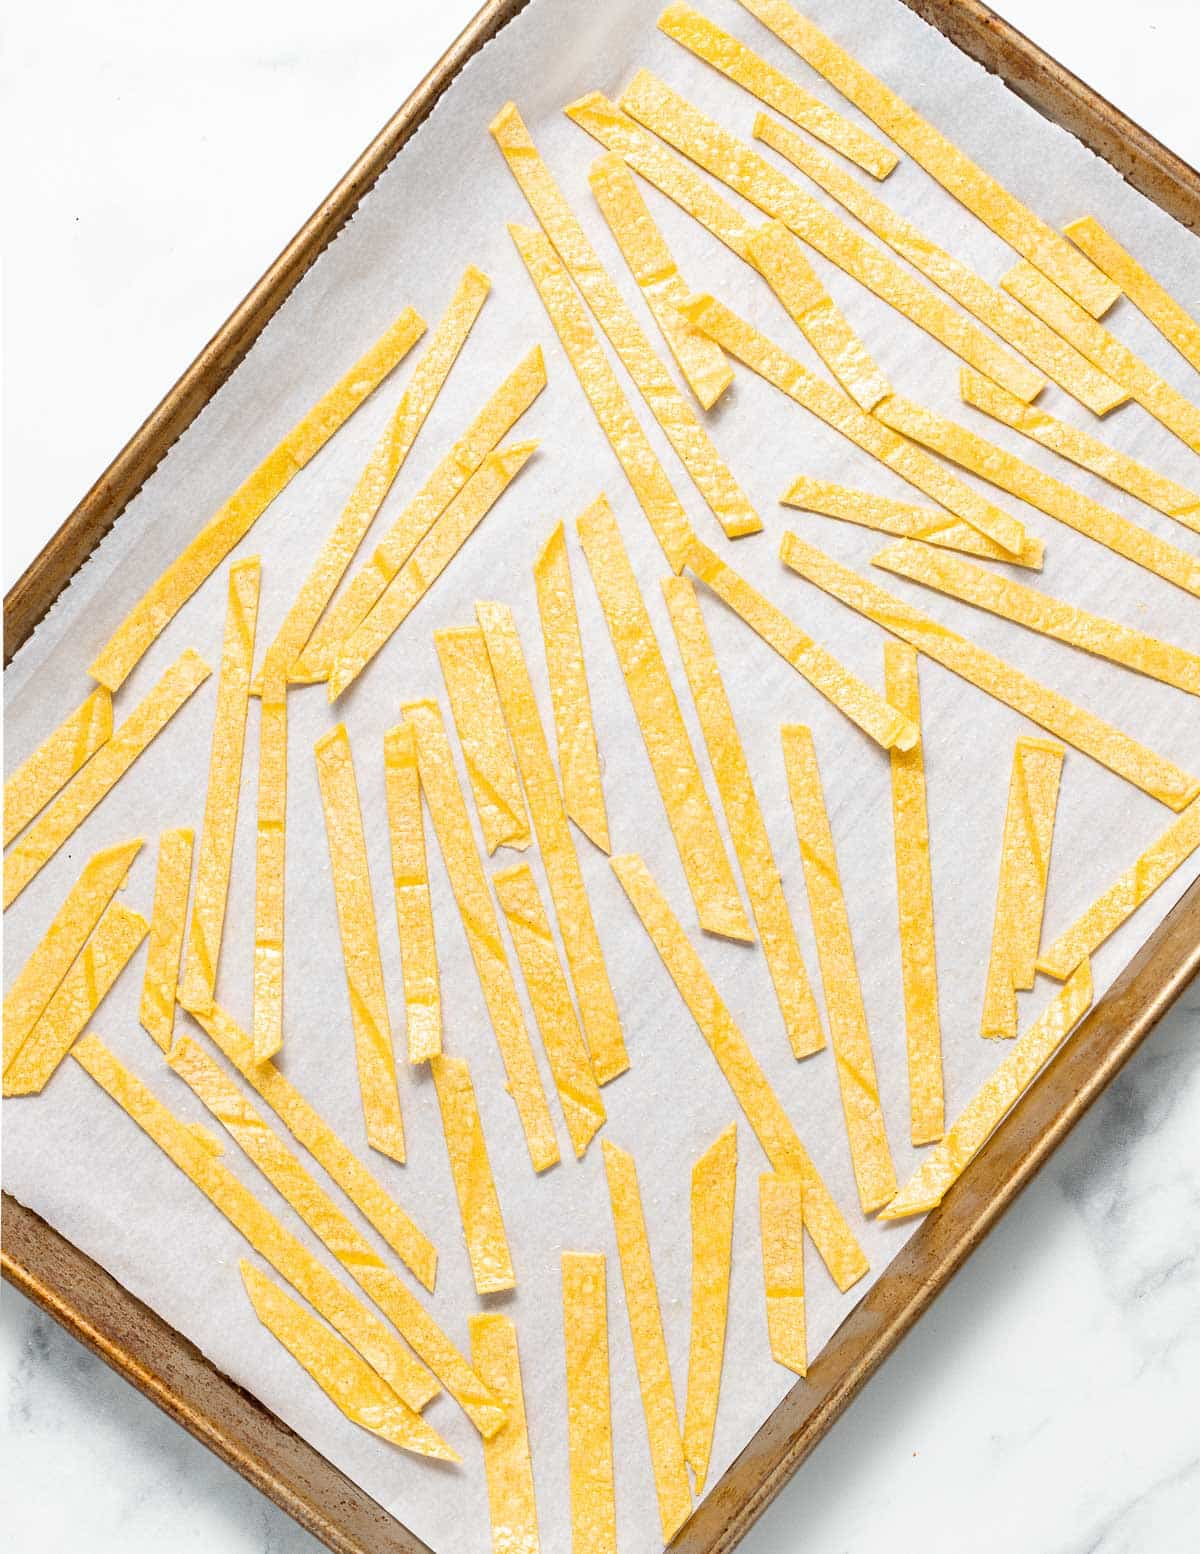 uncooked tortilla strips laid out on a baking parchment lined tray